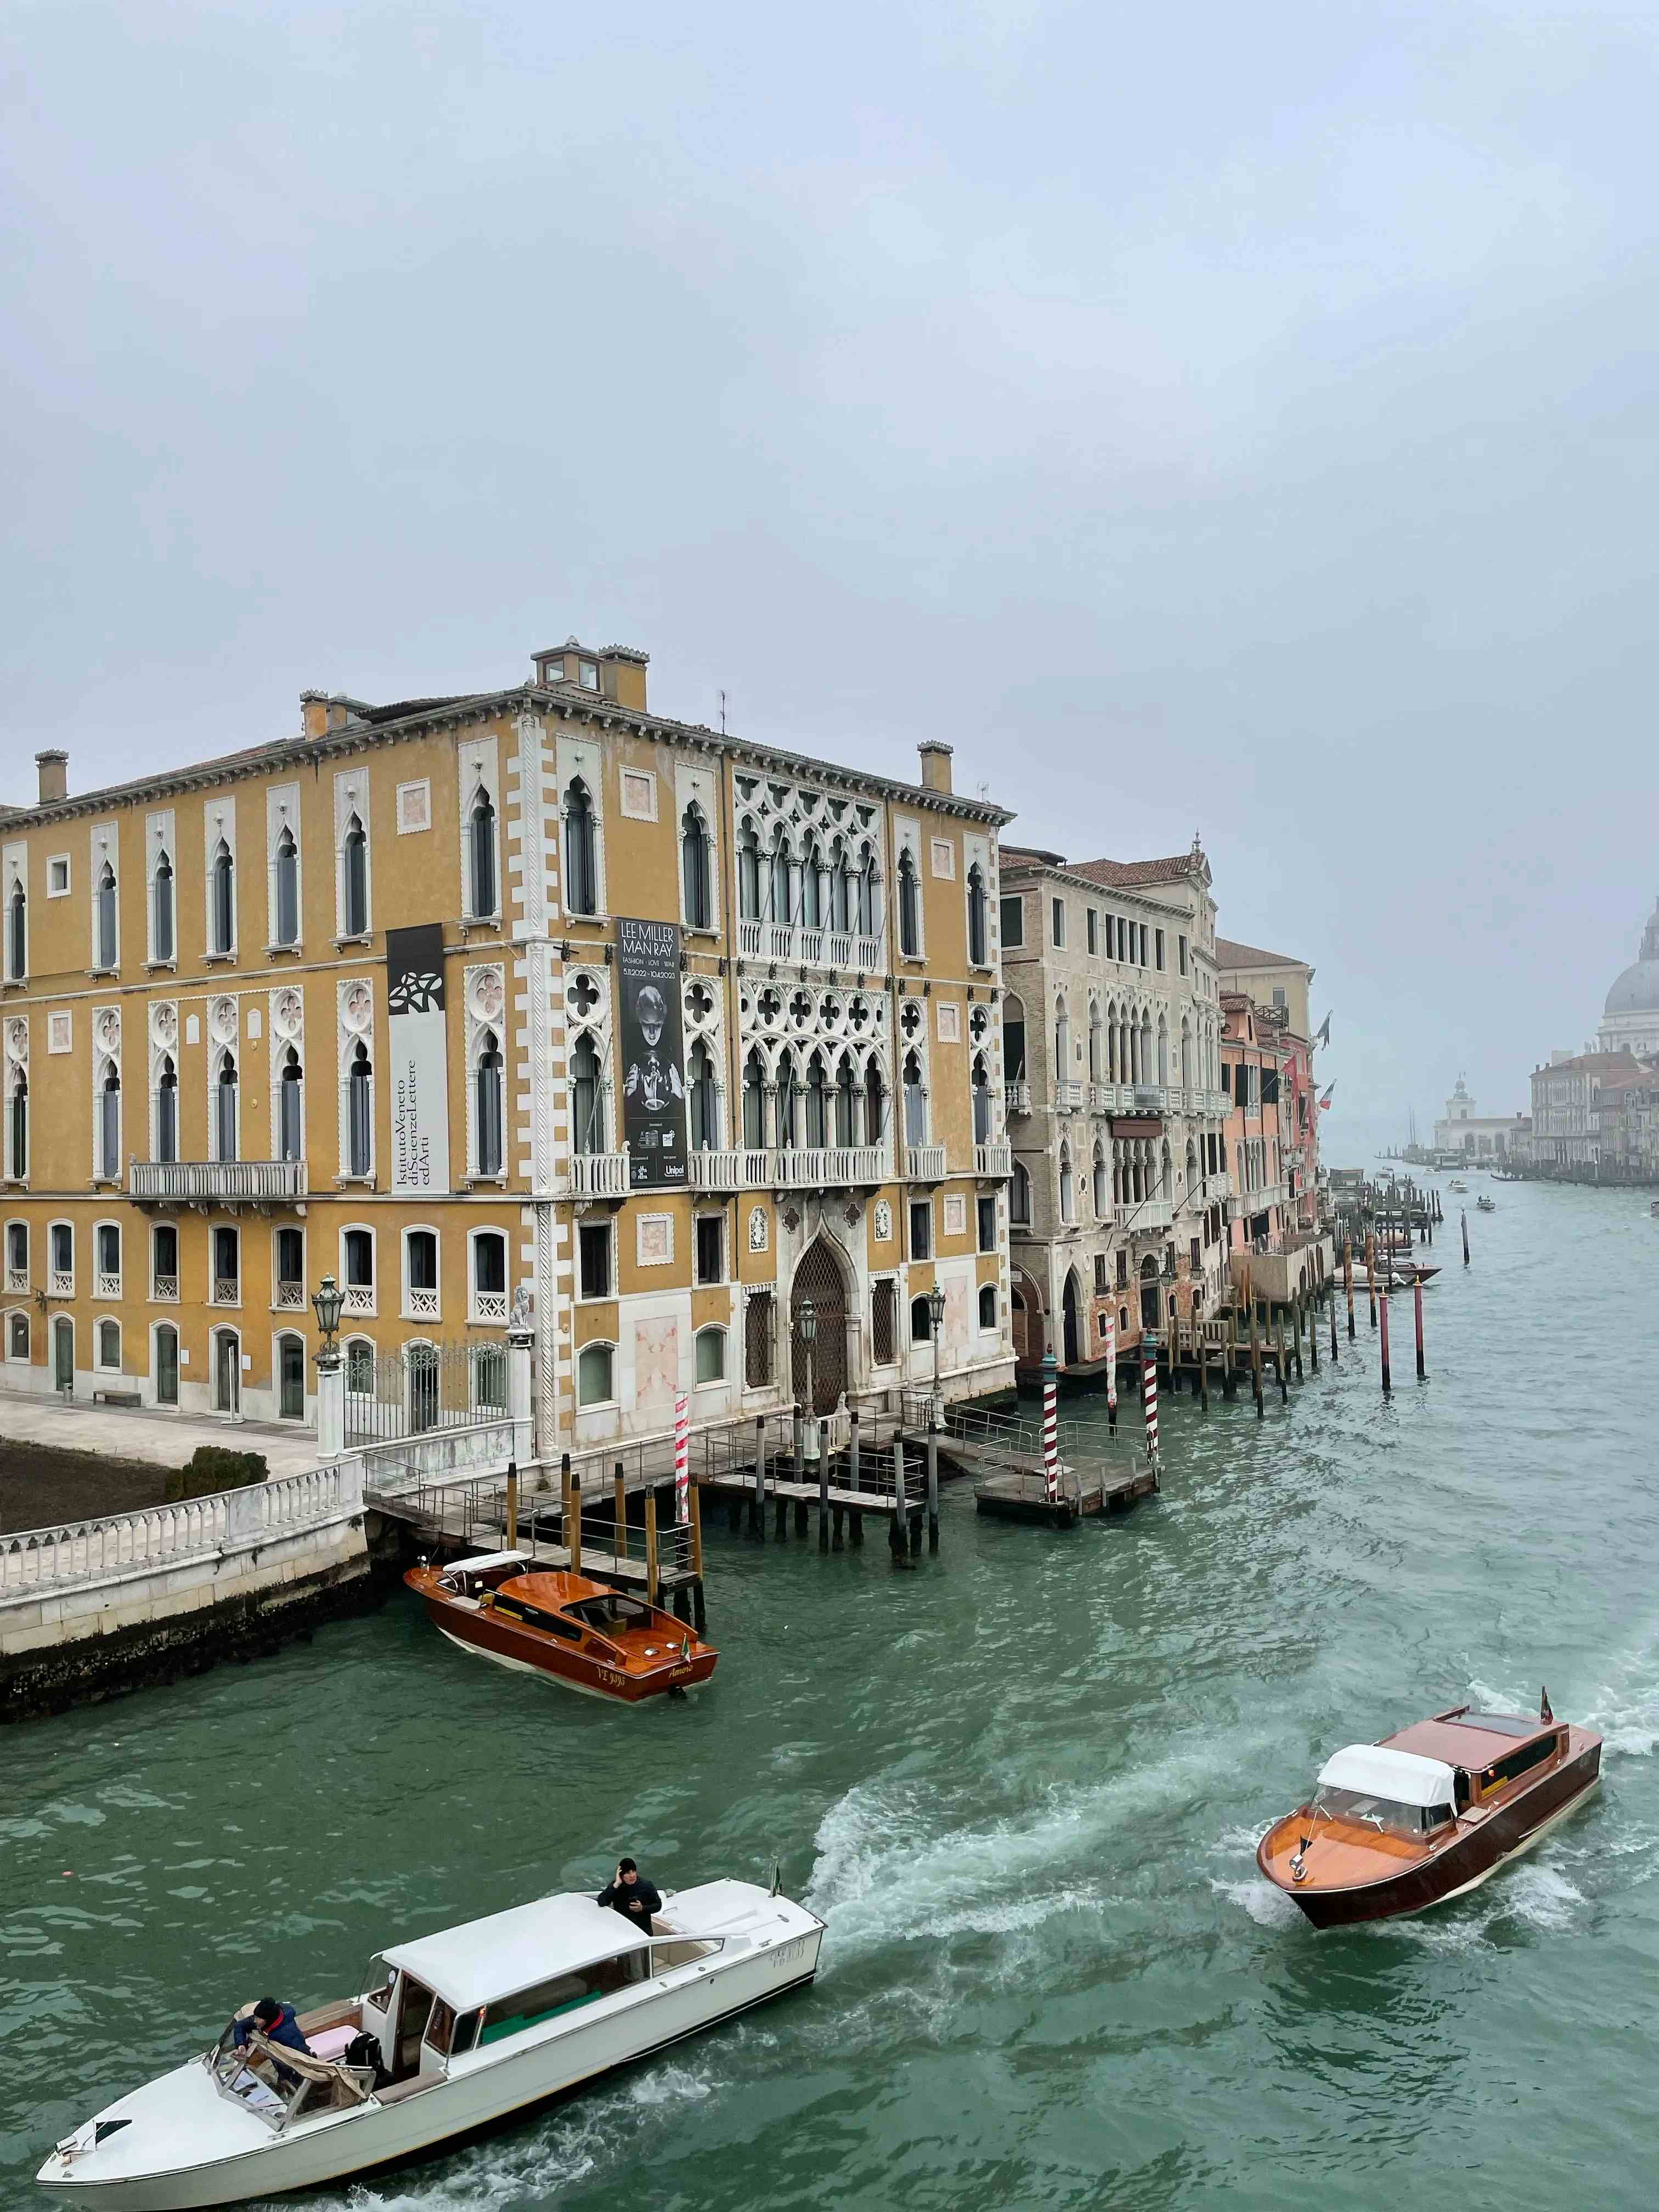 A Traveler's Guide To The Accademia Gallery In Venice image